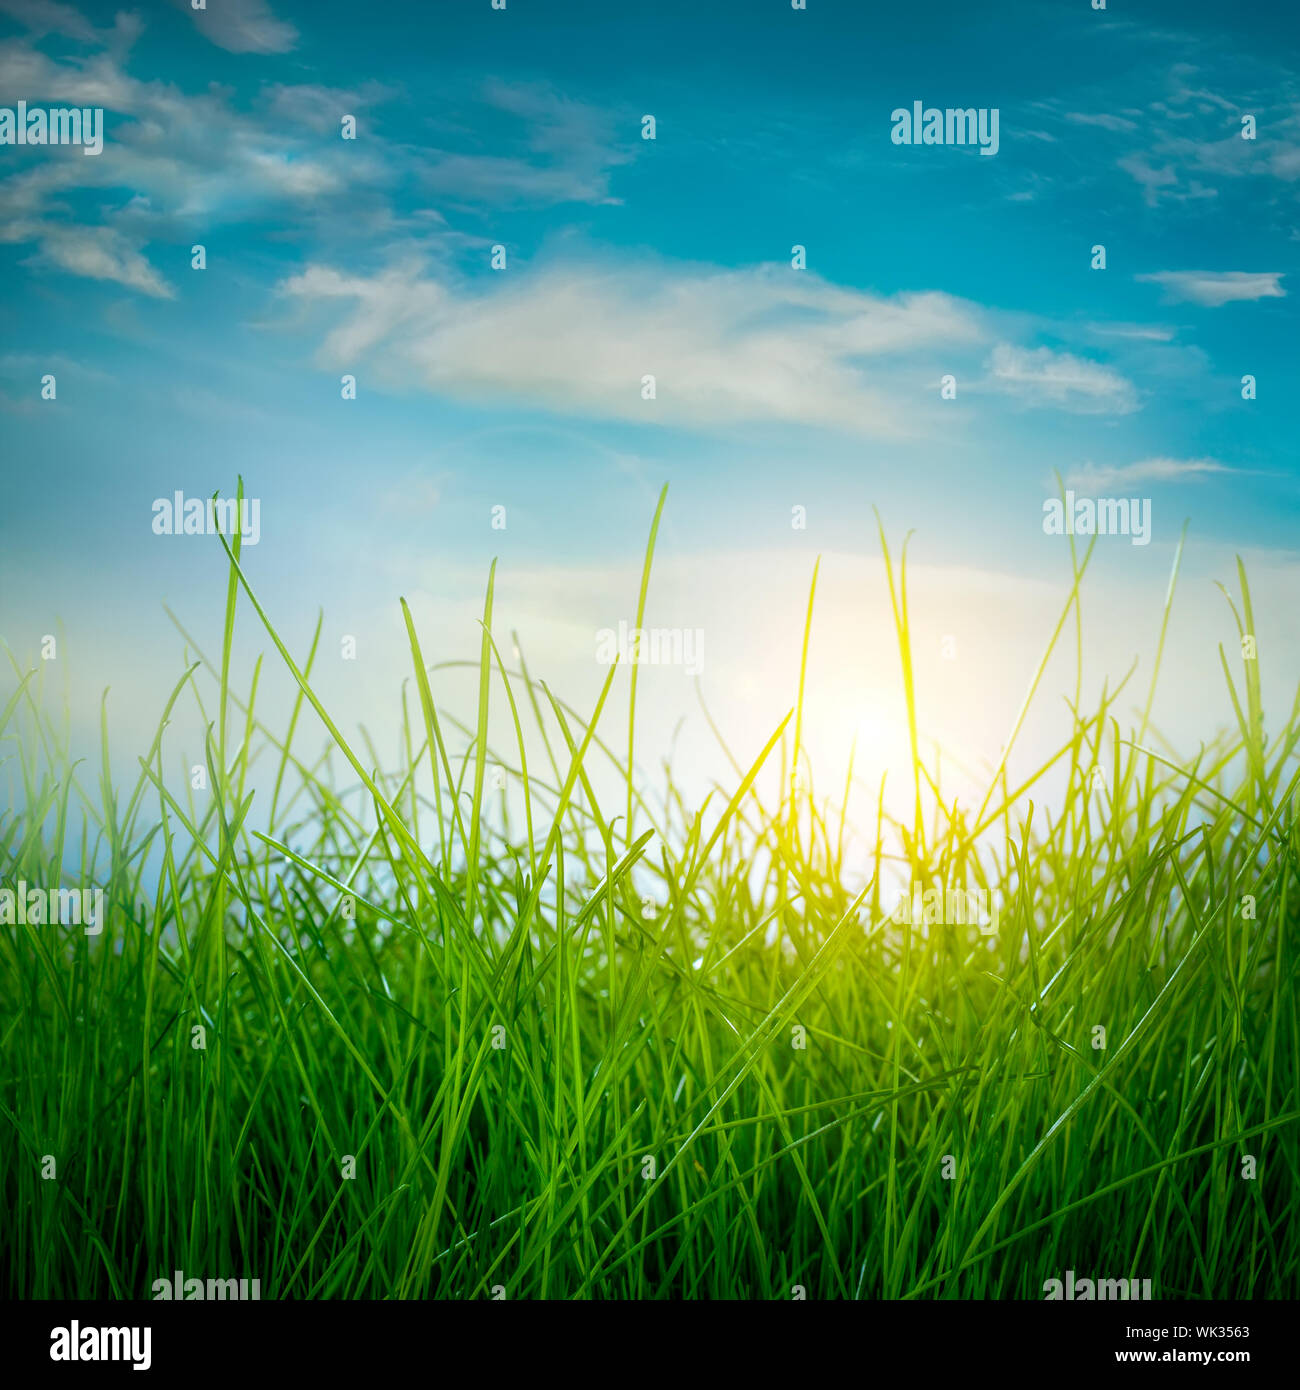 Rainbow And Spring Green Grass And Sun On Blue Sky Background Stock Photo Alamy,Peach Schnapps